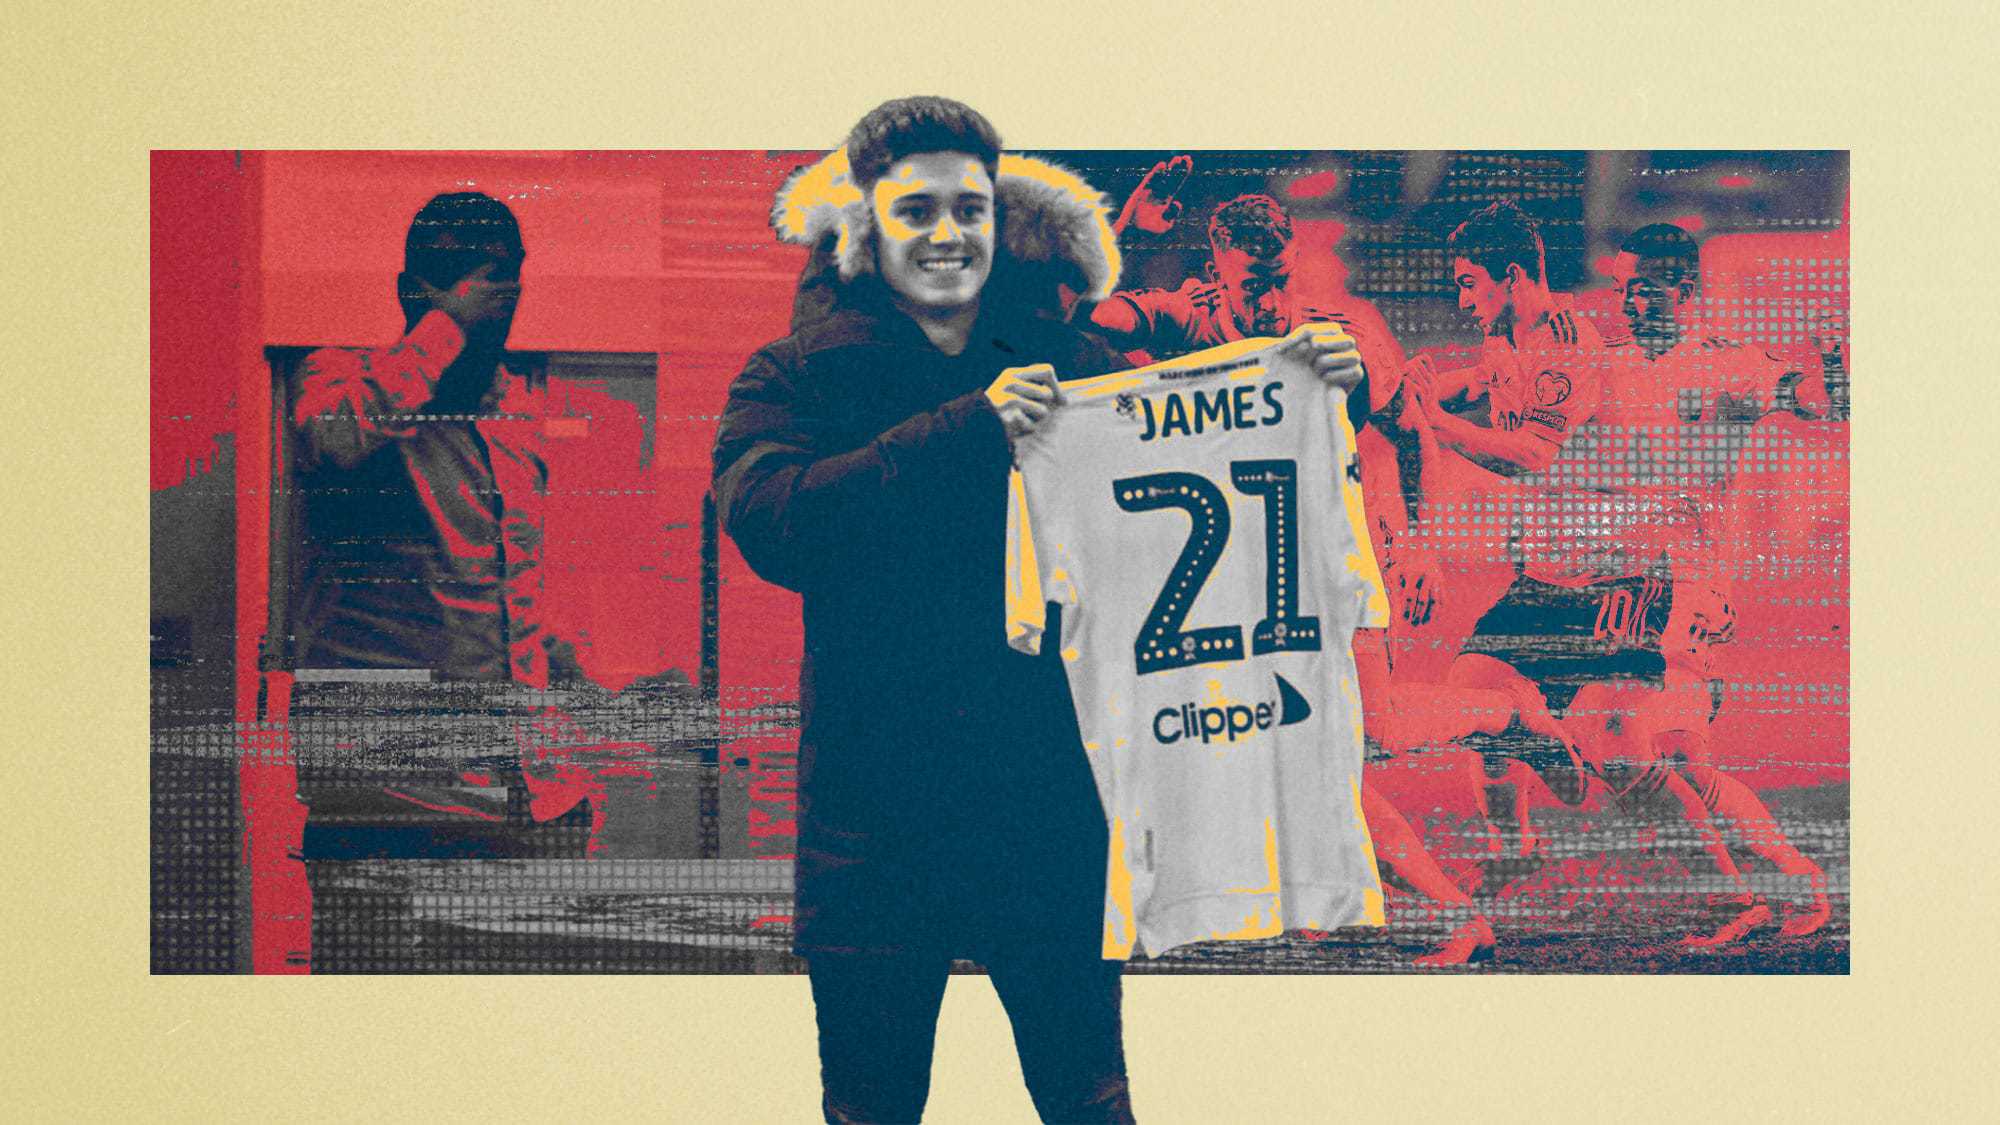 Dan James holding a Leeds shirt up in one of the photos from his failed move